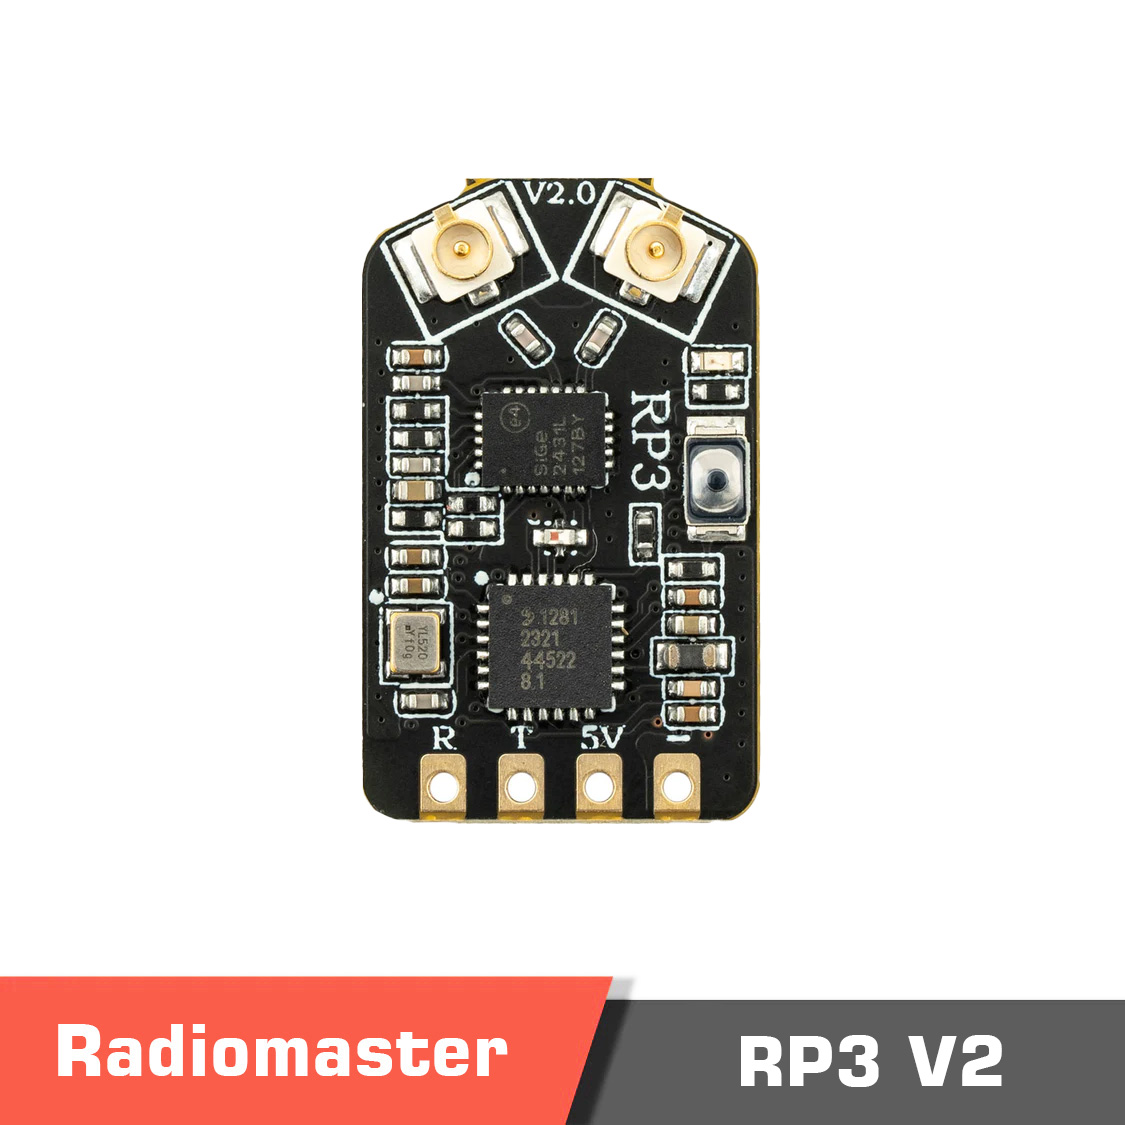 Radiomaster rp3 v2. Temp1 - radiomaster rp4td,2. 4ghz rc control receiver,expresslrs,elrs,2. 4ghz radio receiver,nano receiver,expresslrs 2. 4ghz receiver,improved pcb design,compact receiver,on-board smt antenna,crsf bus interface,rc control system upgrade,2. 4ghz ism band rc receiver,heat dissipation capabilities,high-performance rc receiver,impressive range and responsiveness receiver,high refresh rate receiver,reliable signal reception - motionew - 2